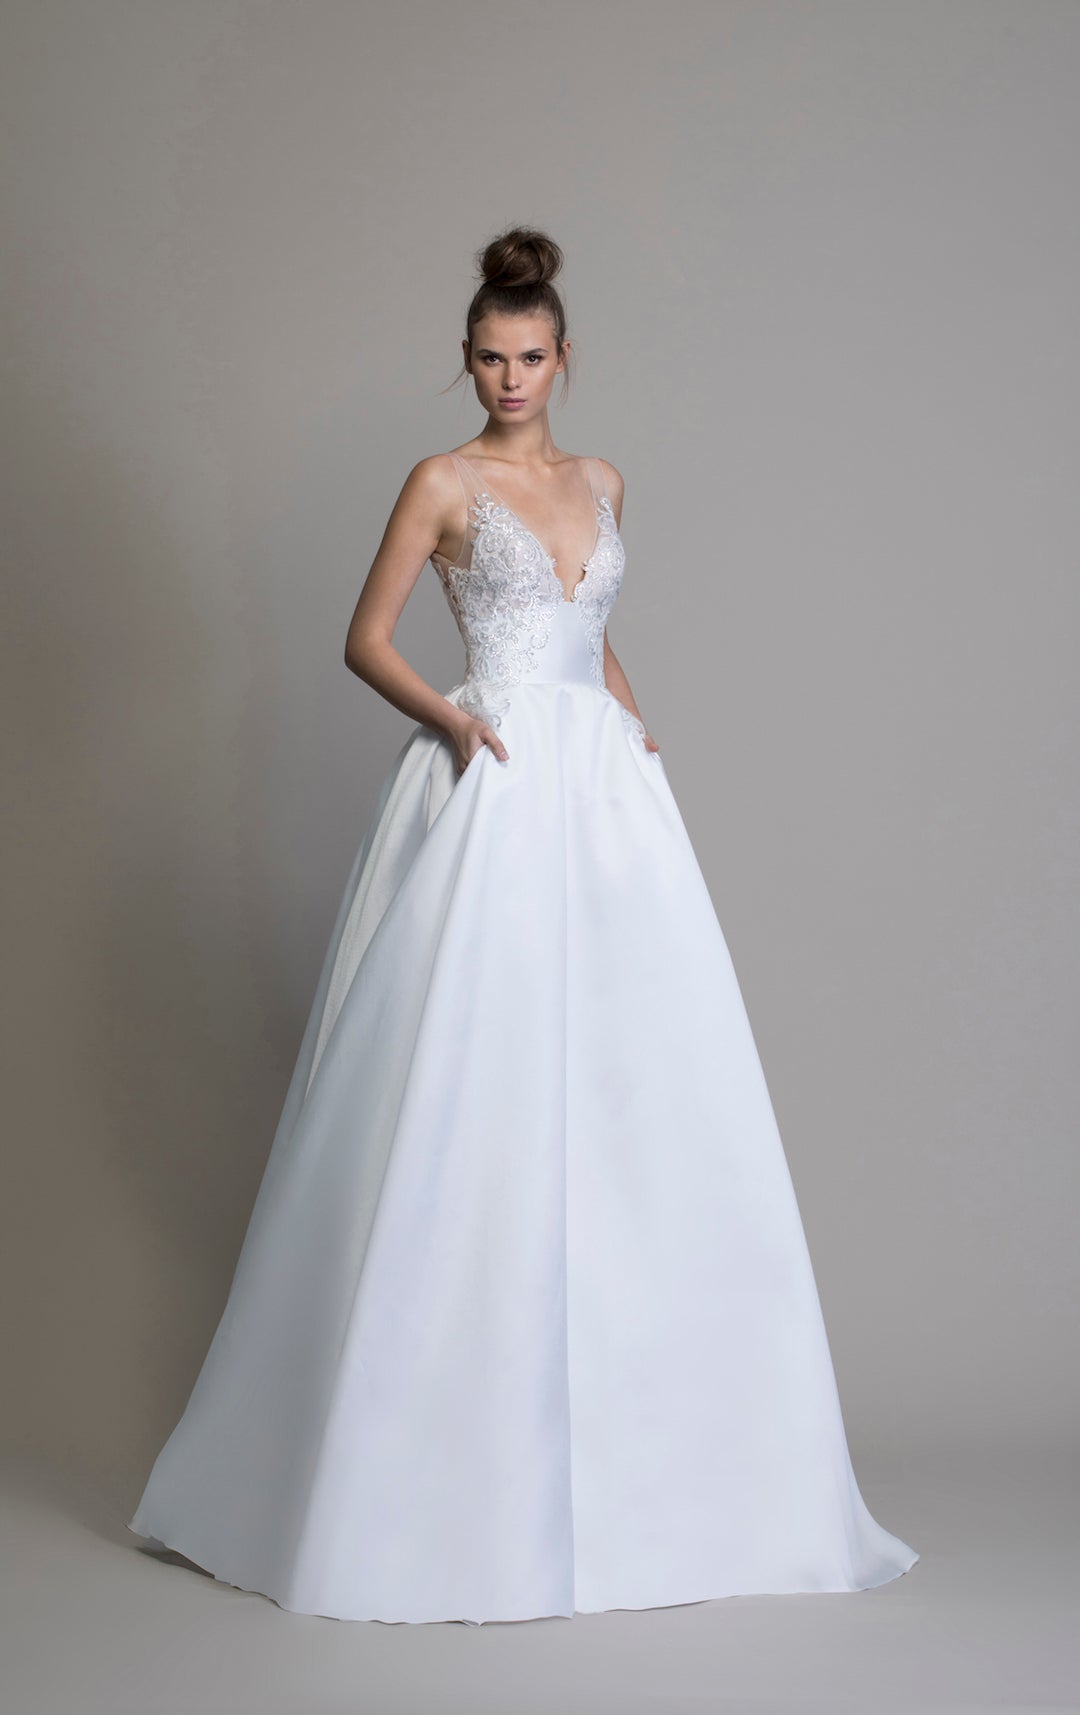 Pnina Tornai's new LOVE 2020 Collection is out! This is style 14762